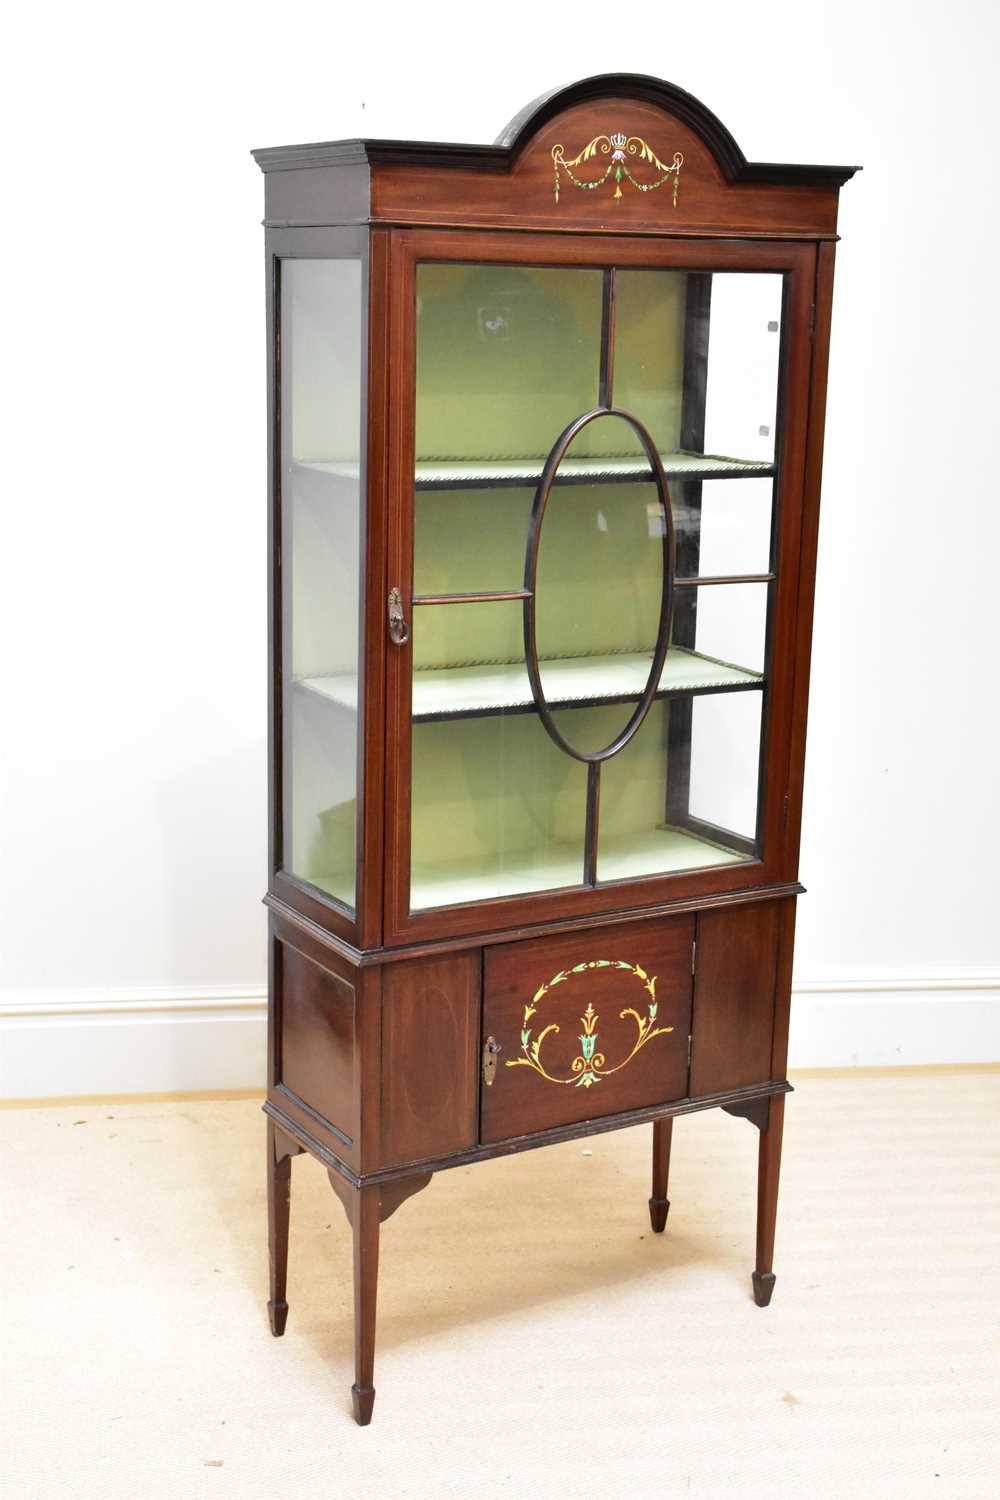 An Edwardian inlaid mahogany display cabinet with painted arched top and with a single glazed